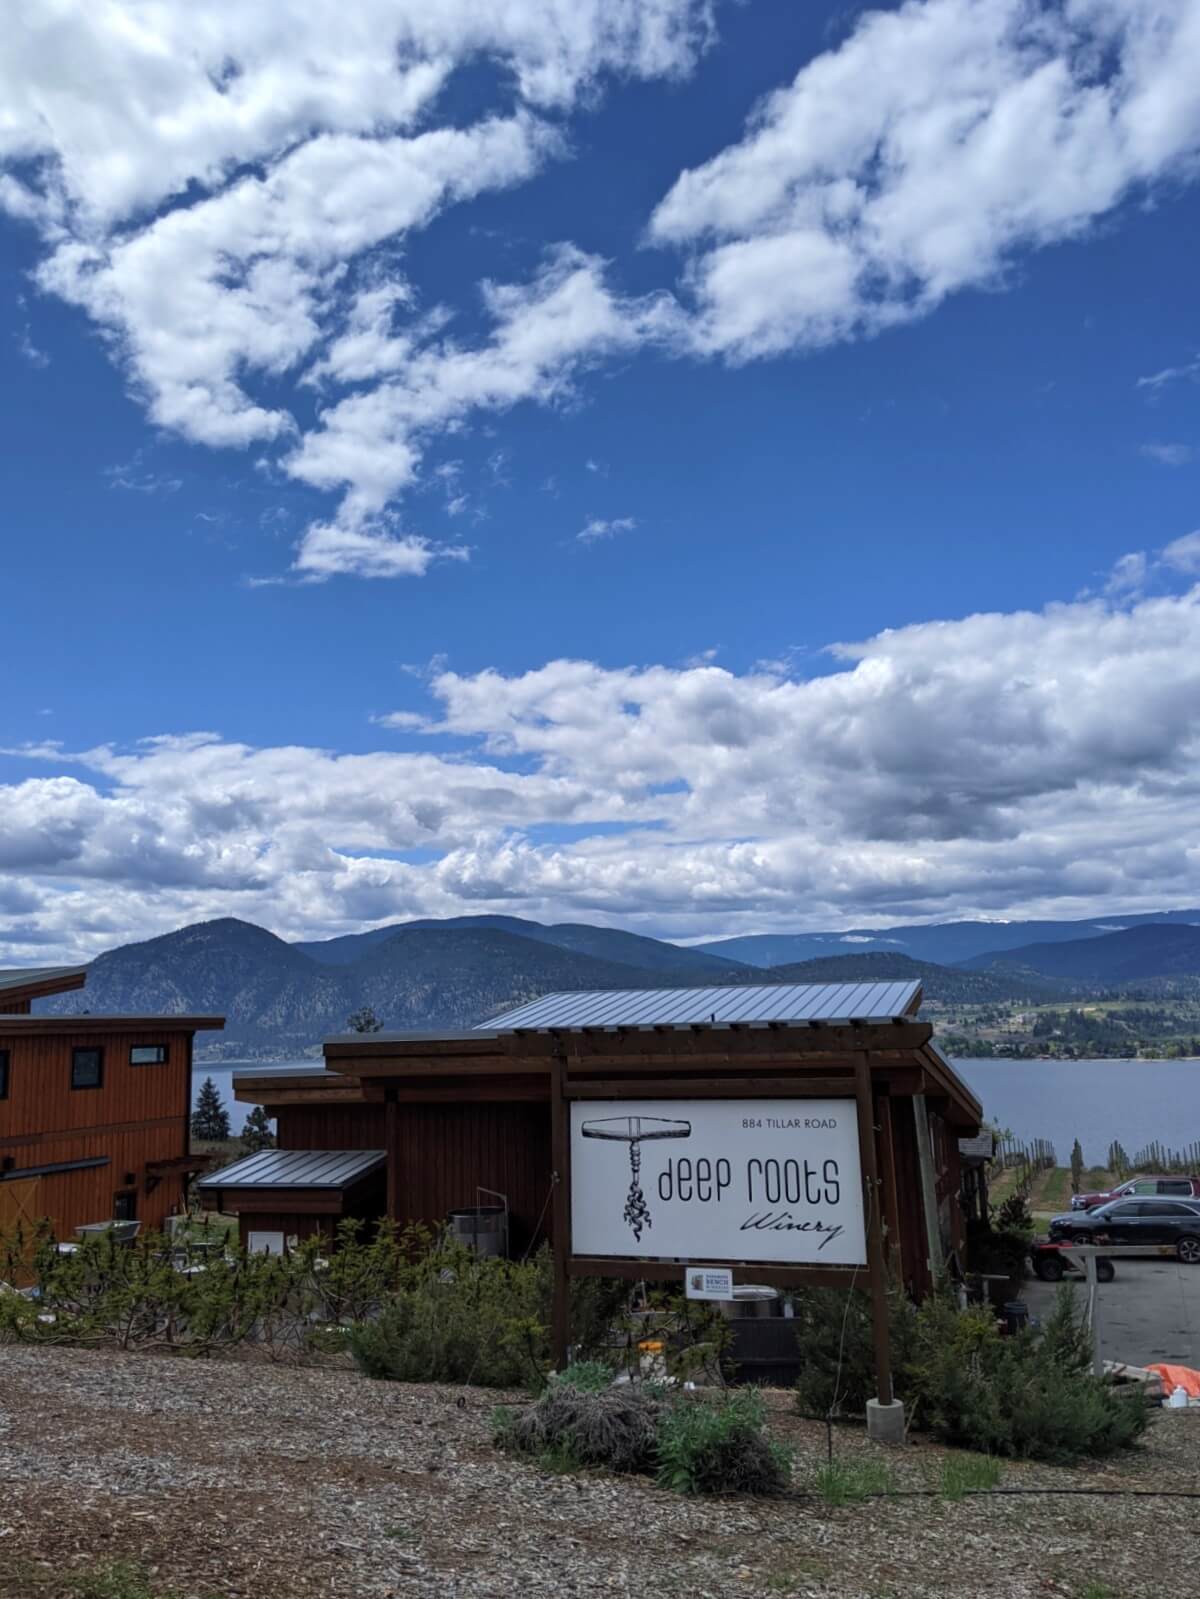 Deep Roots Winery building, with large white sign featuring logo, in front of small wooden building, with Okanagan Lake visible behind